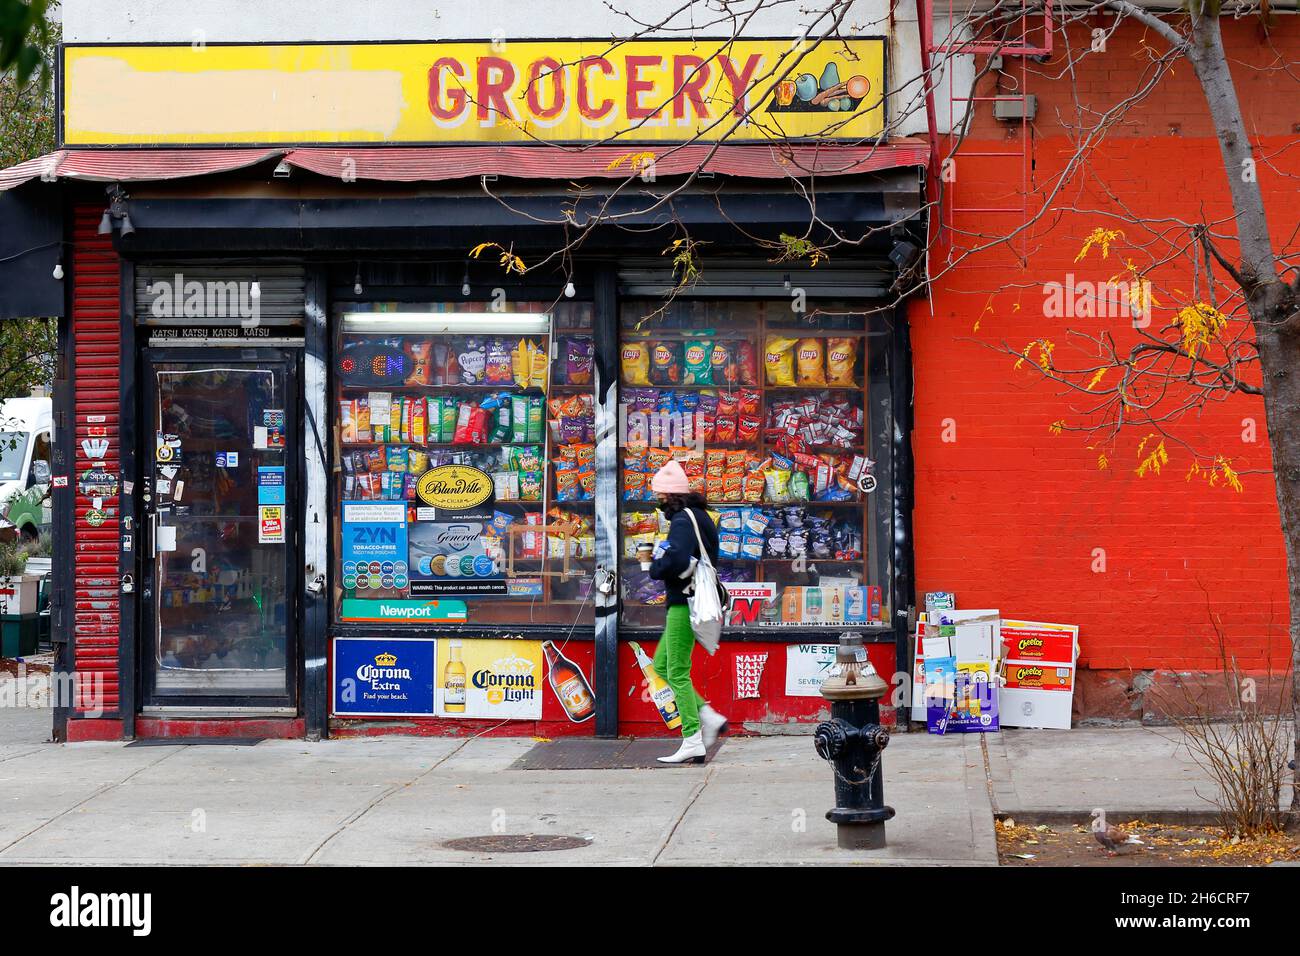 A Generation Z person walks by a deli grocery bodega in the Wililamsburg neighborhood in Brooklyn, New York Stock Photo